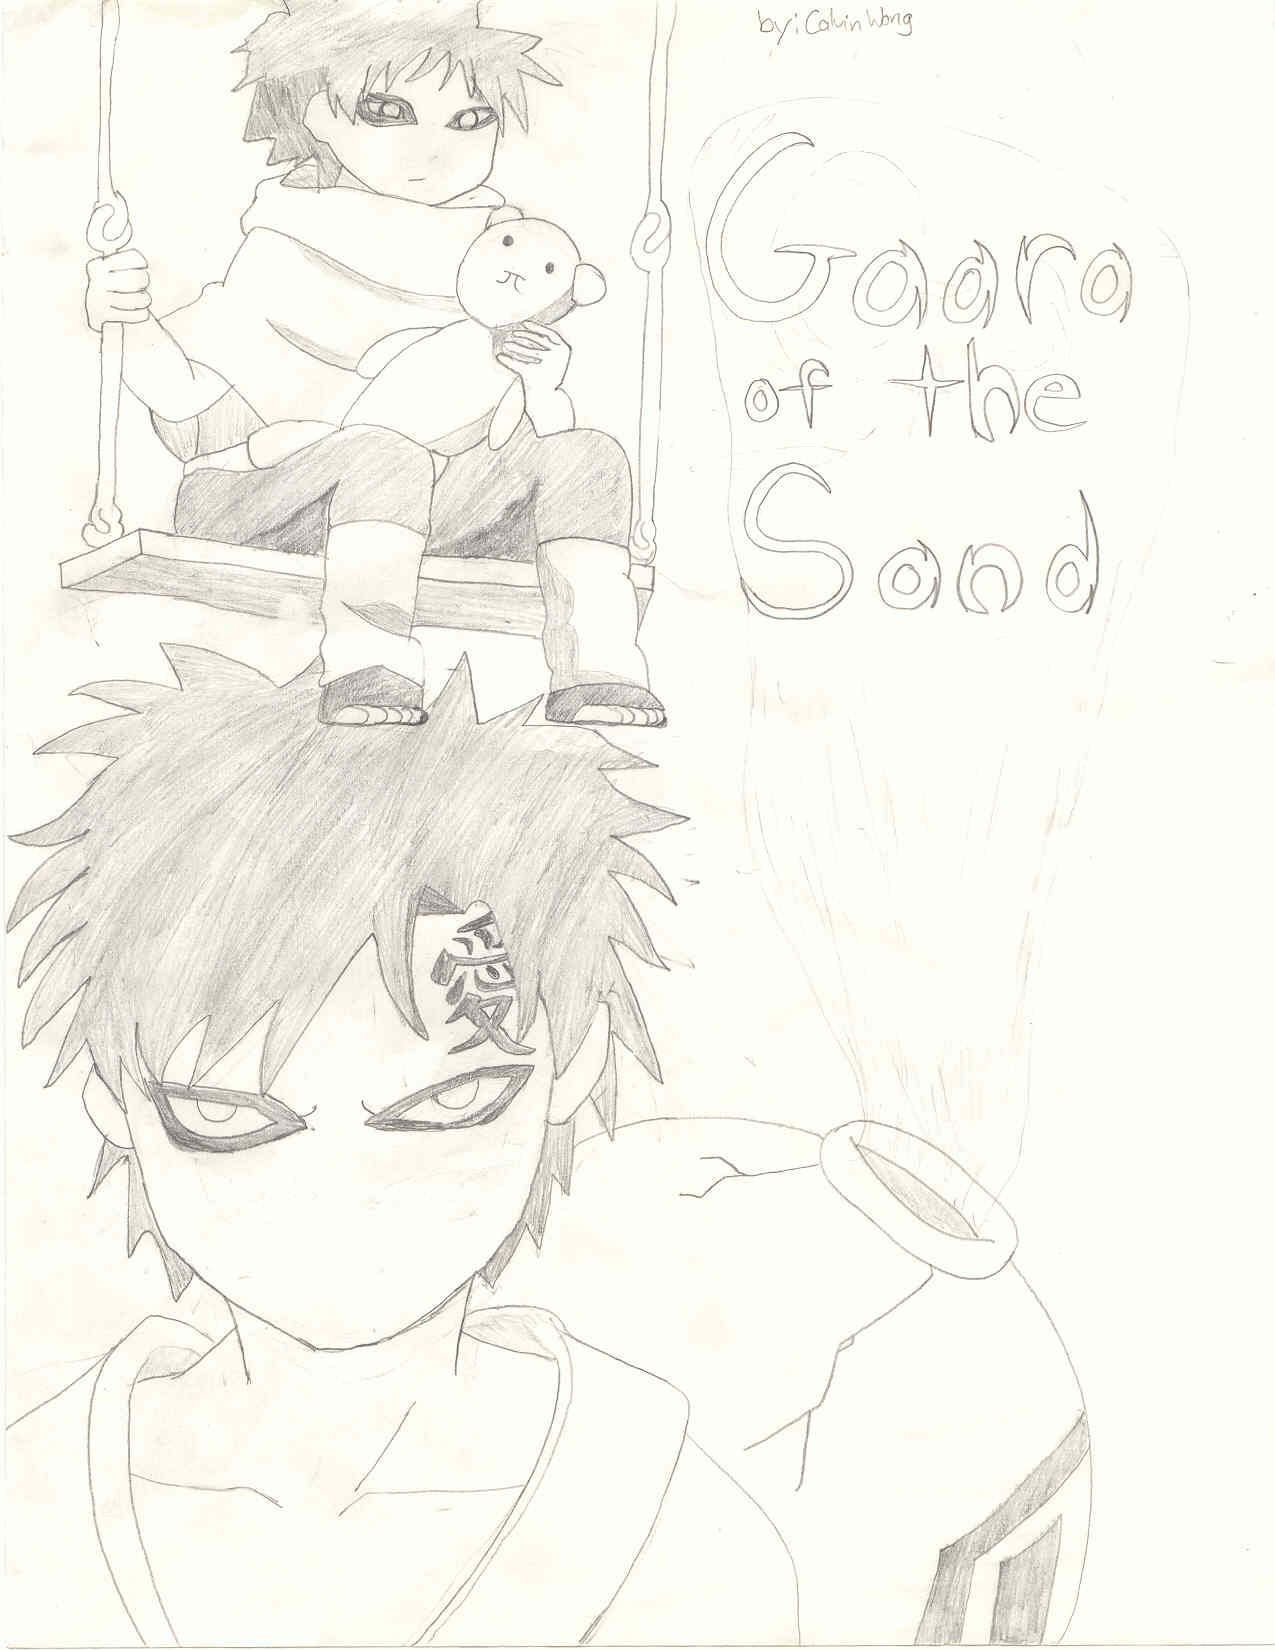 Gaara of the Sand by lil_metal_mouth_loser